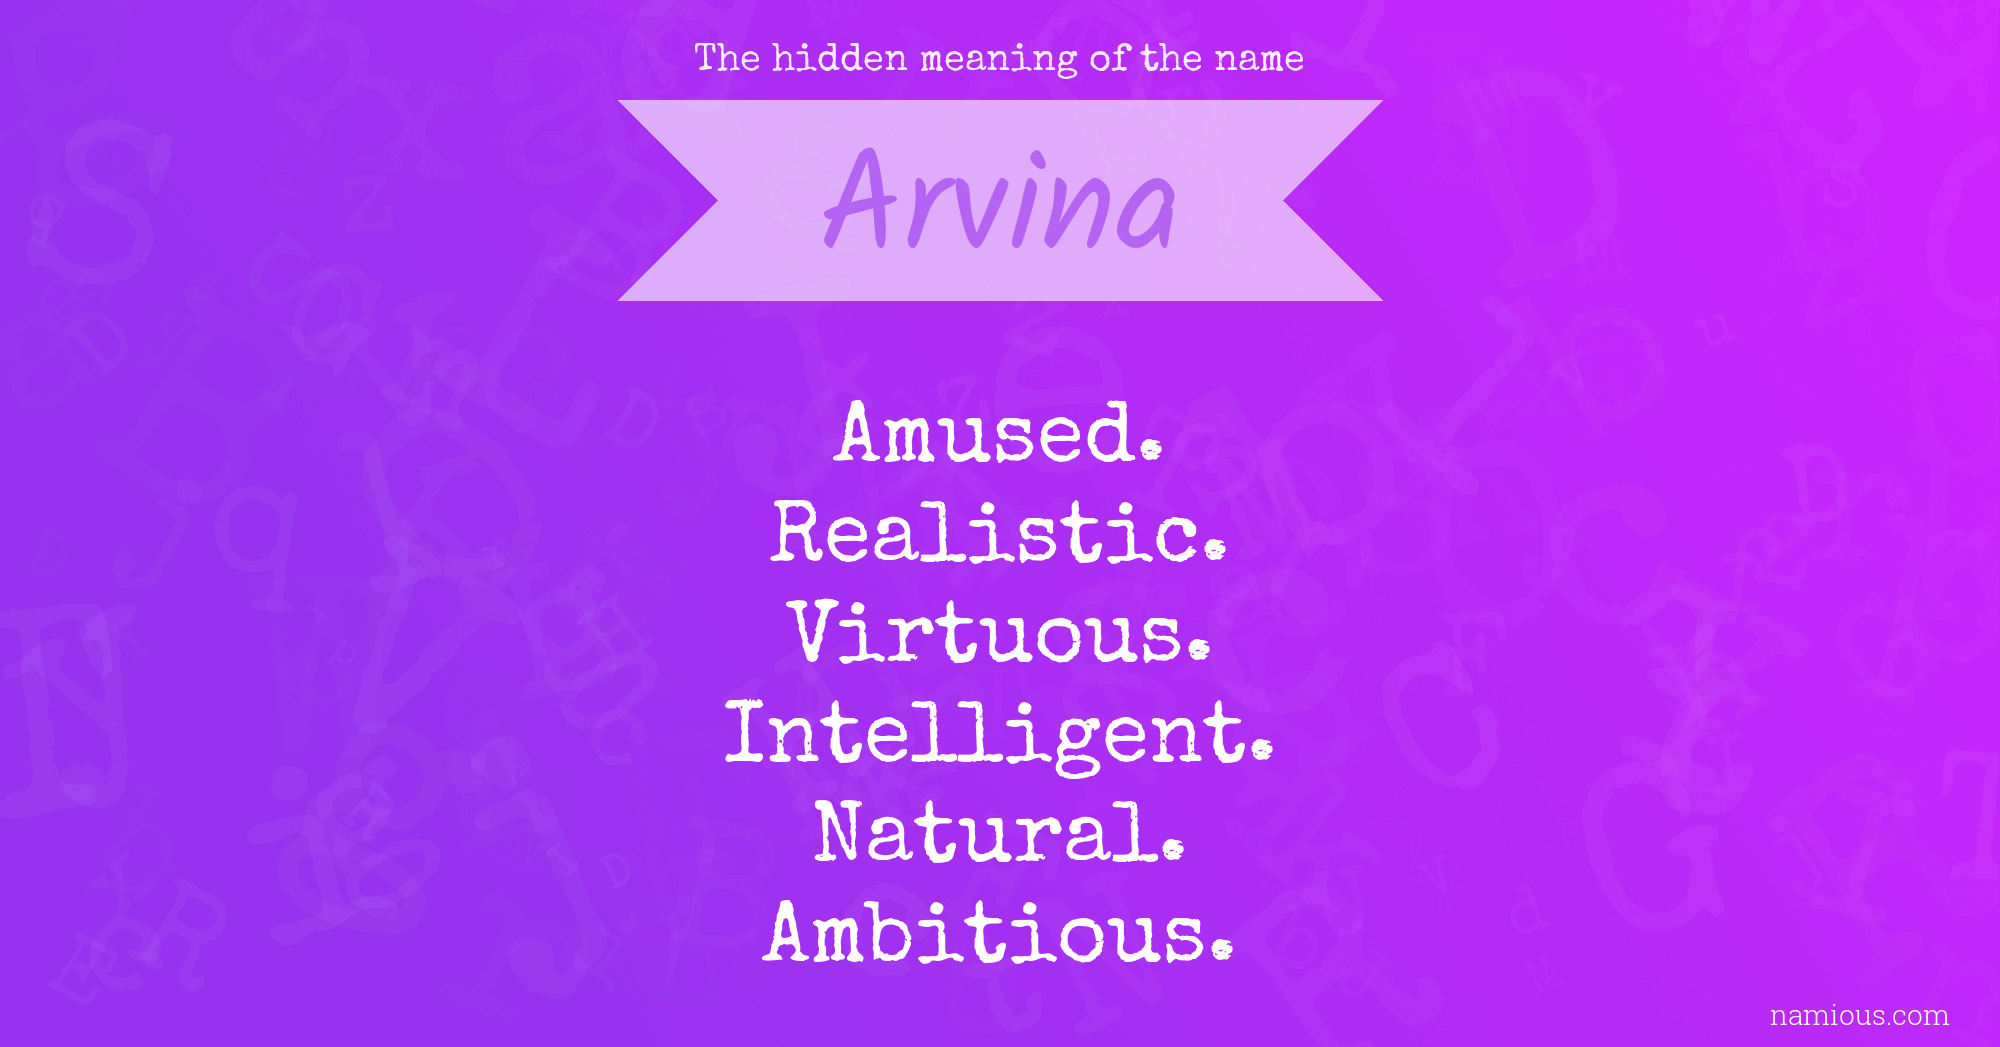 The hidden meaning of the name Arvina